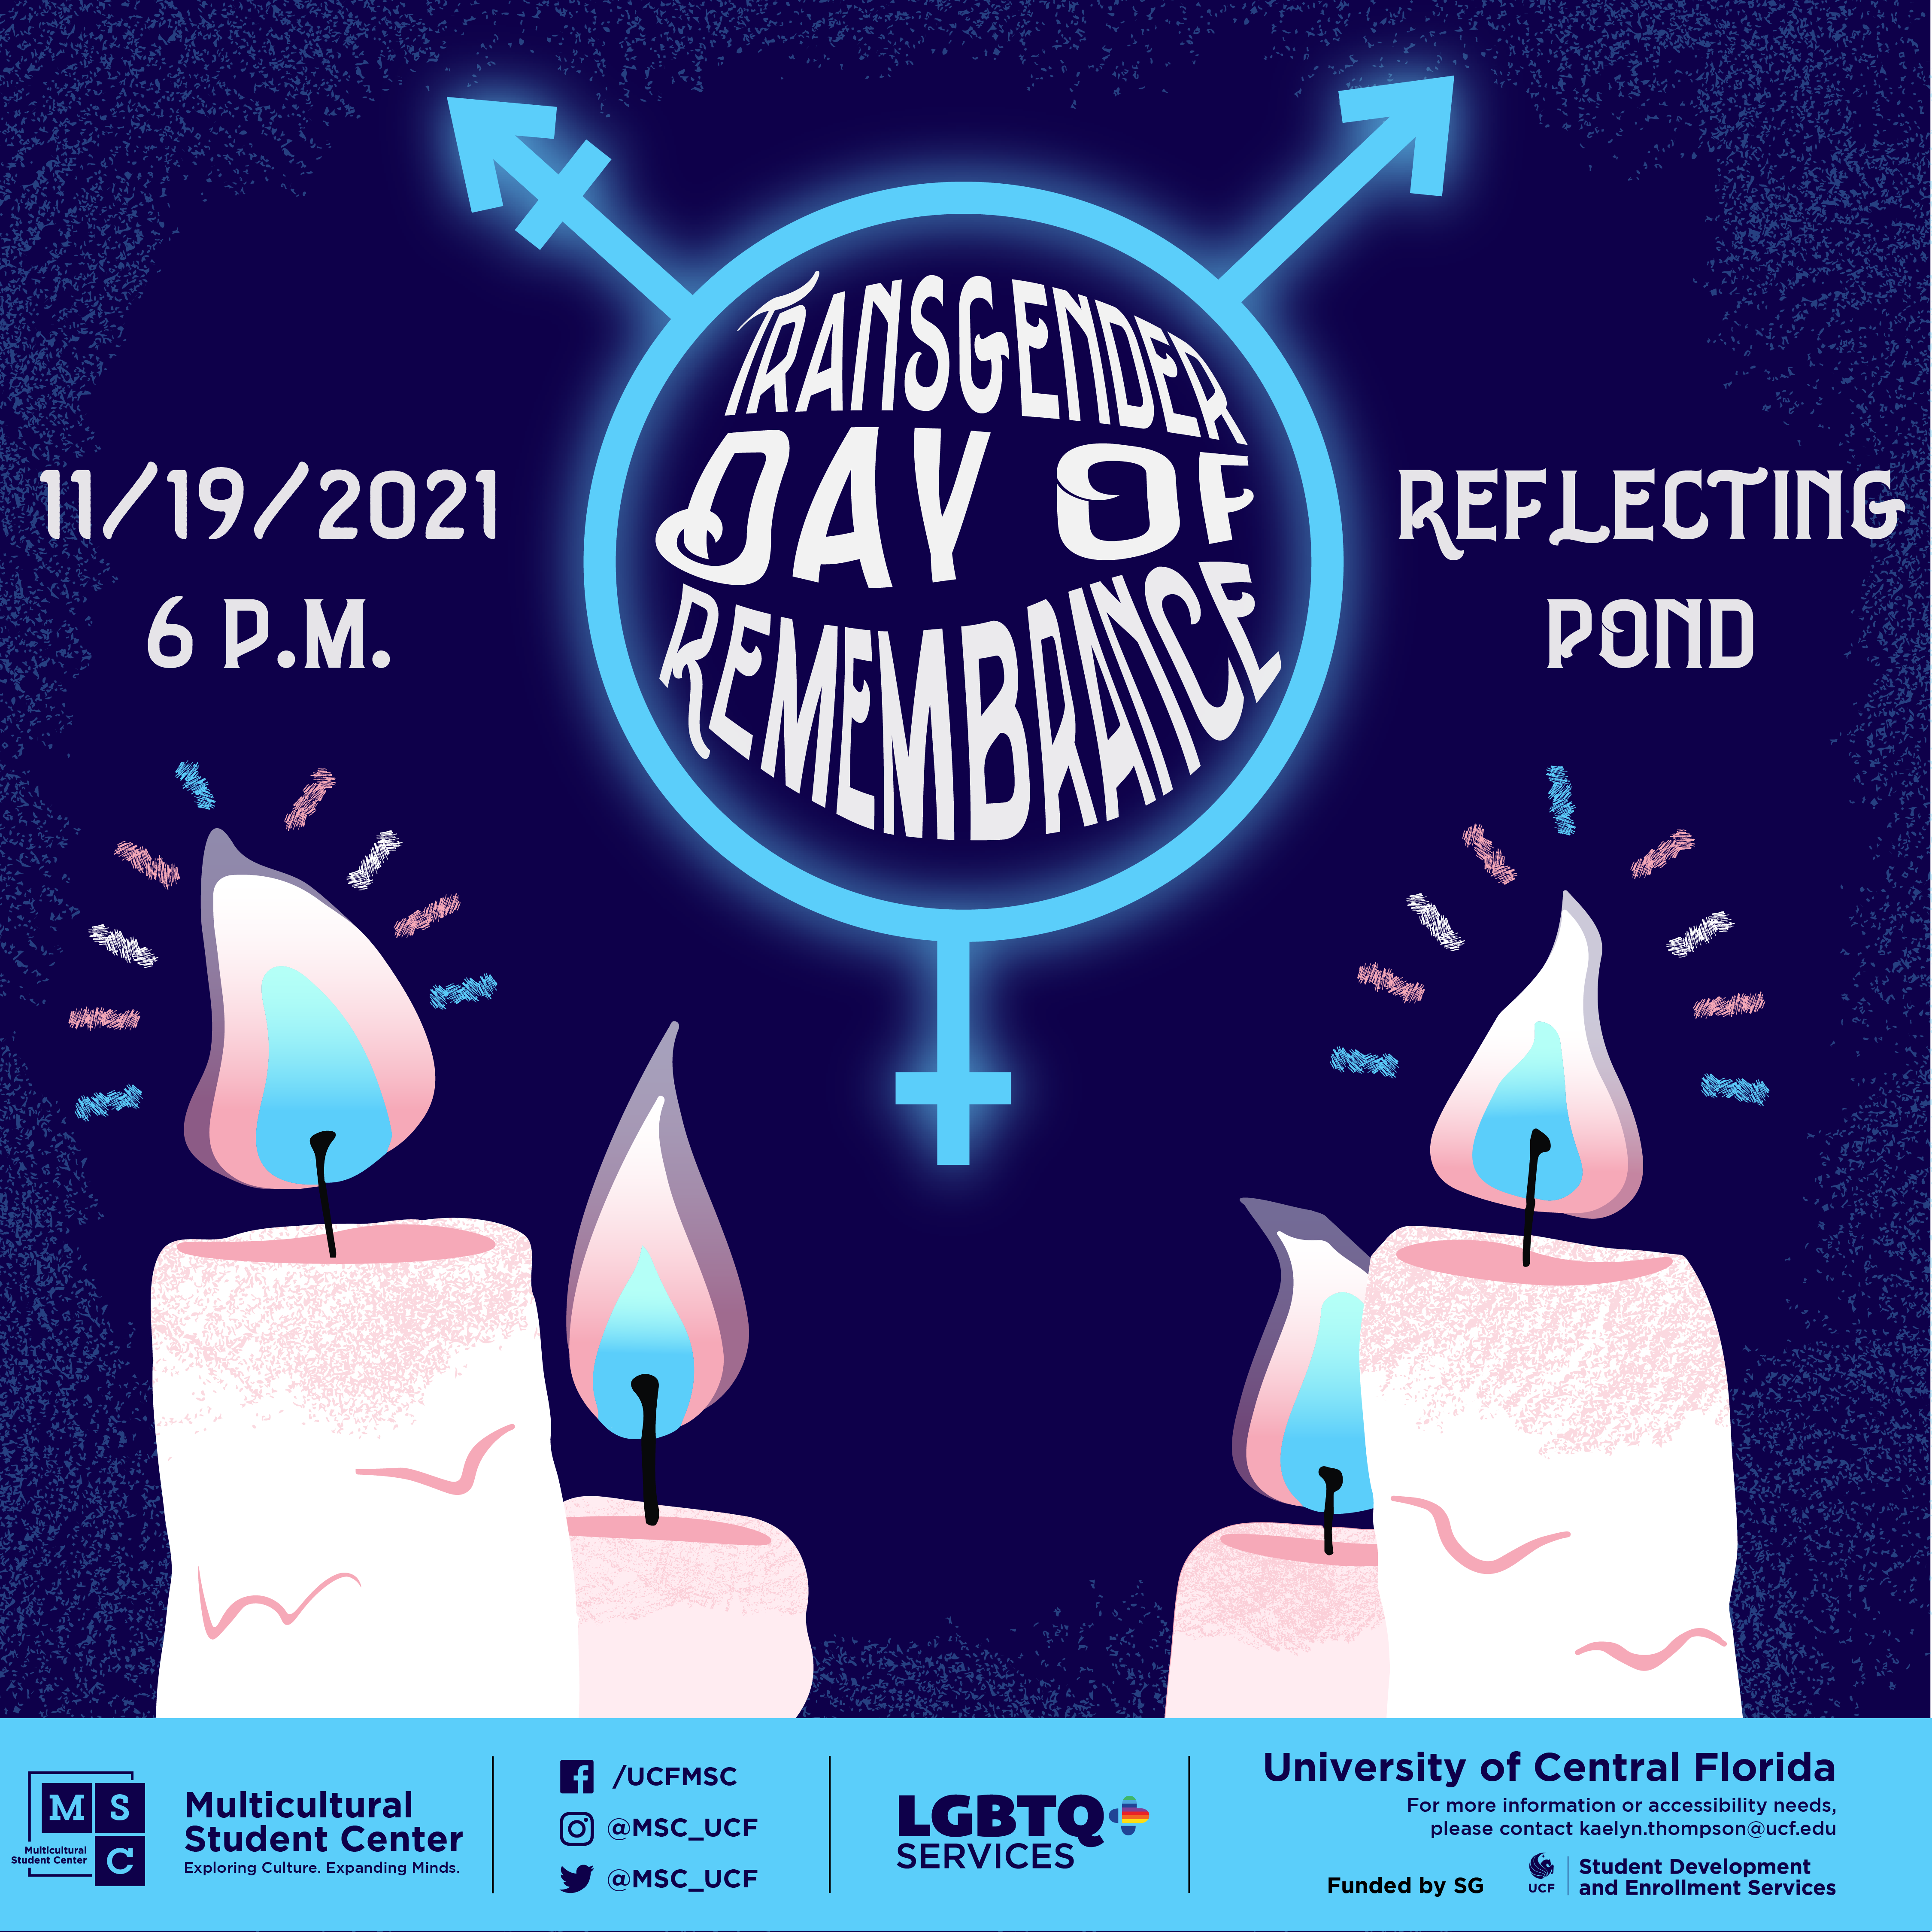 Transgender day of remembrance event flyer design, lit candles in pink, blue, and white